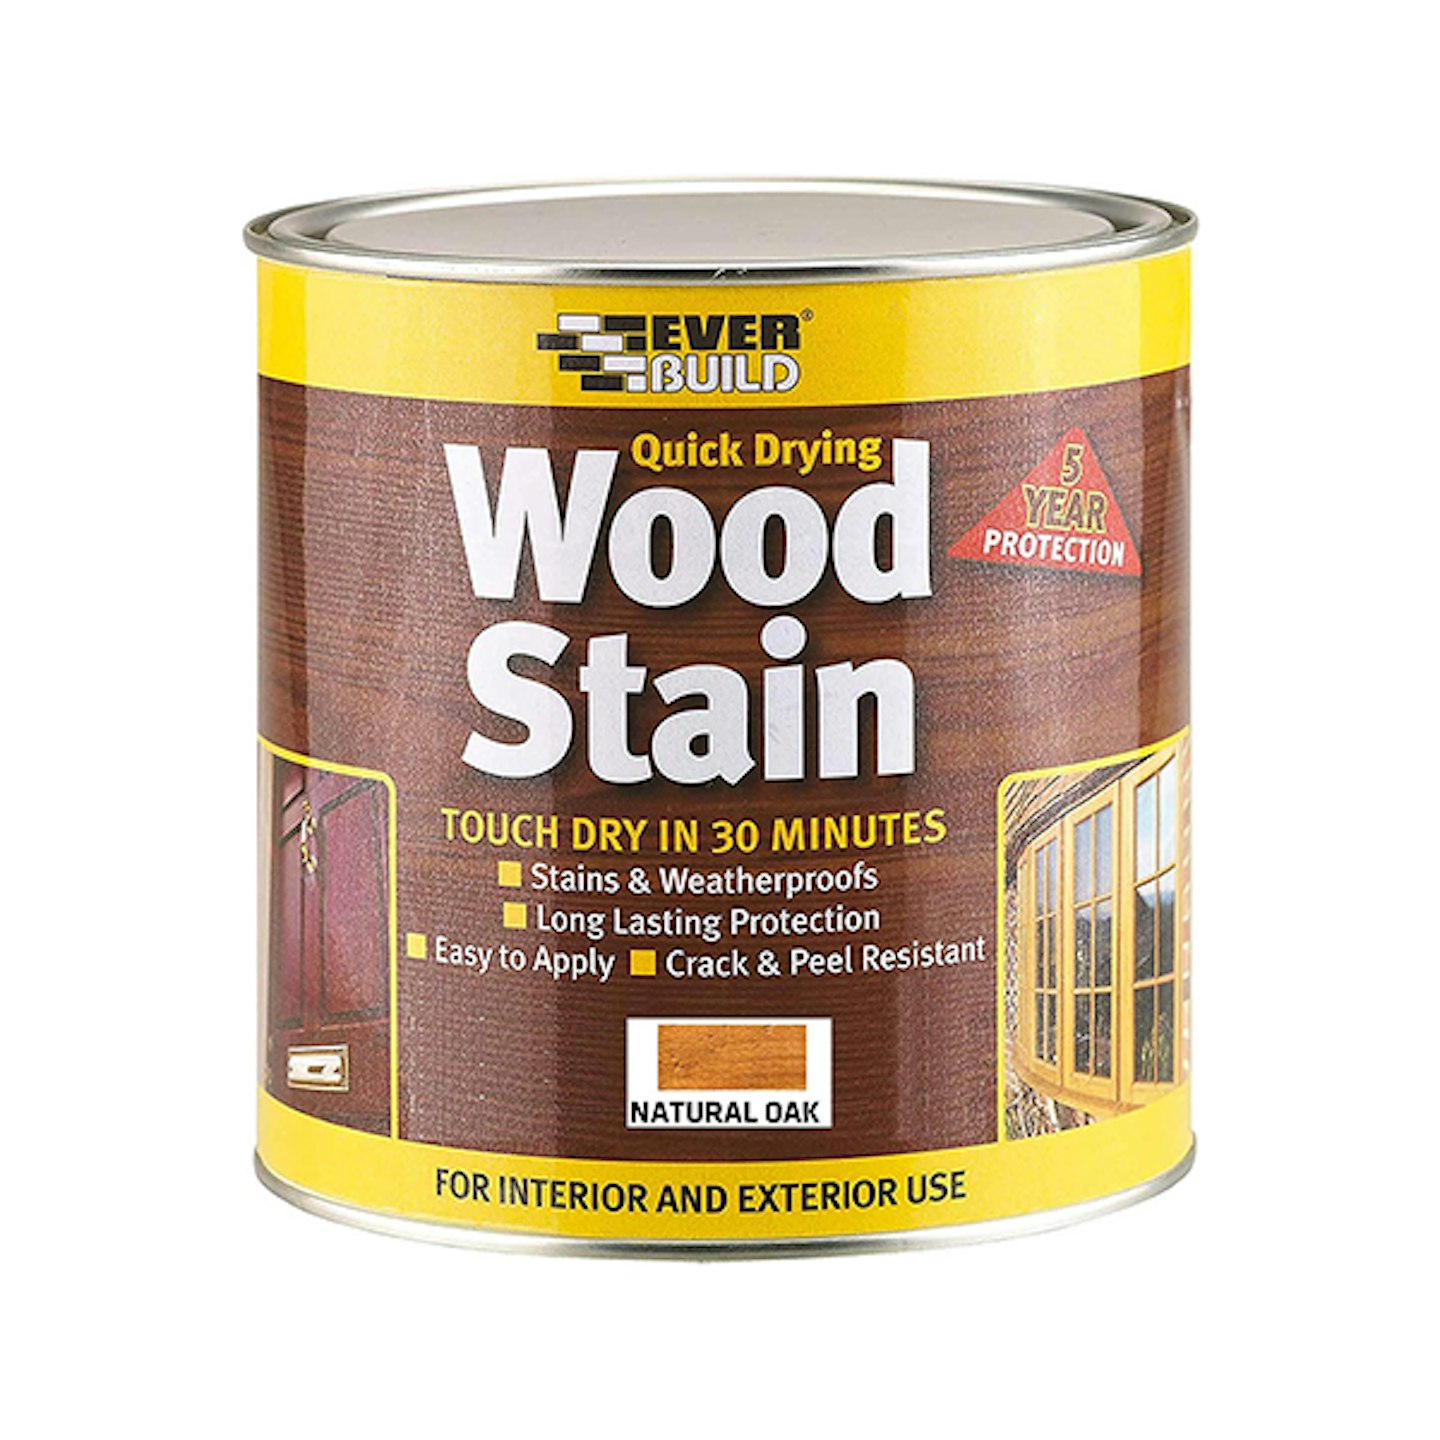 Everbuild Quick Drying Professional Solvent Free Satin Finish Wood Stain, Natural Oak